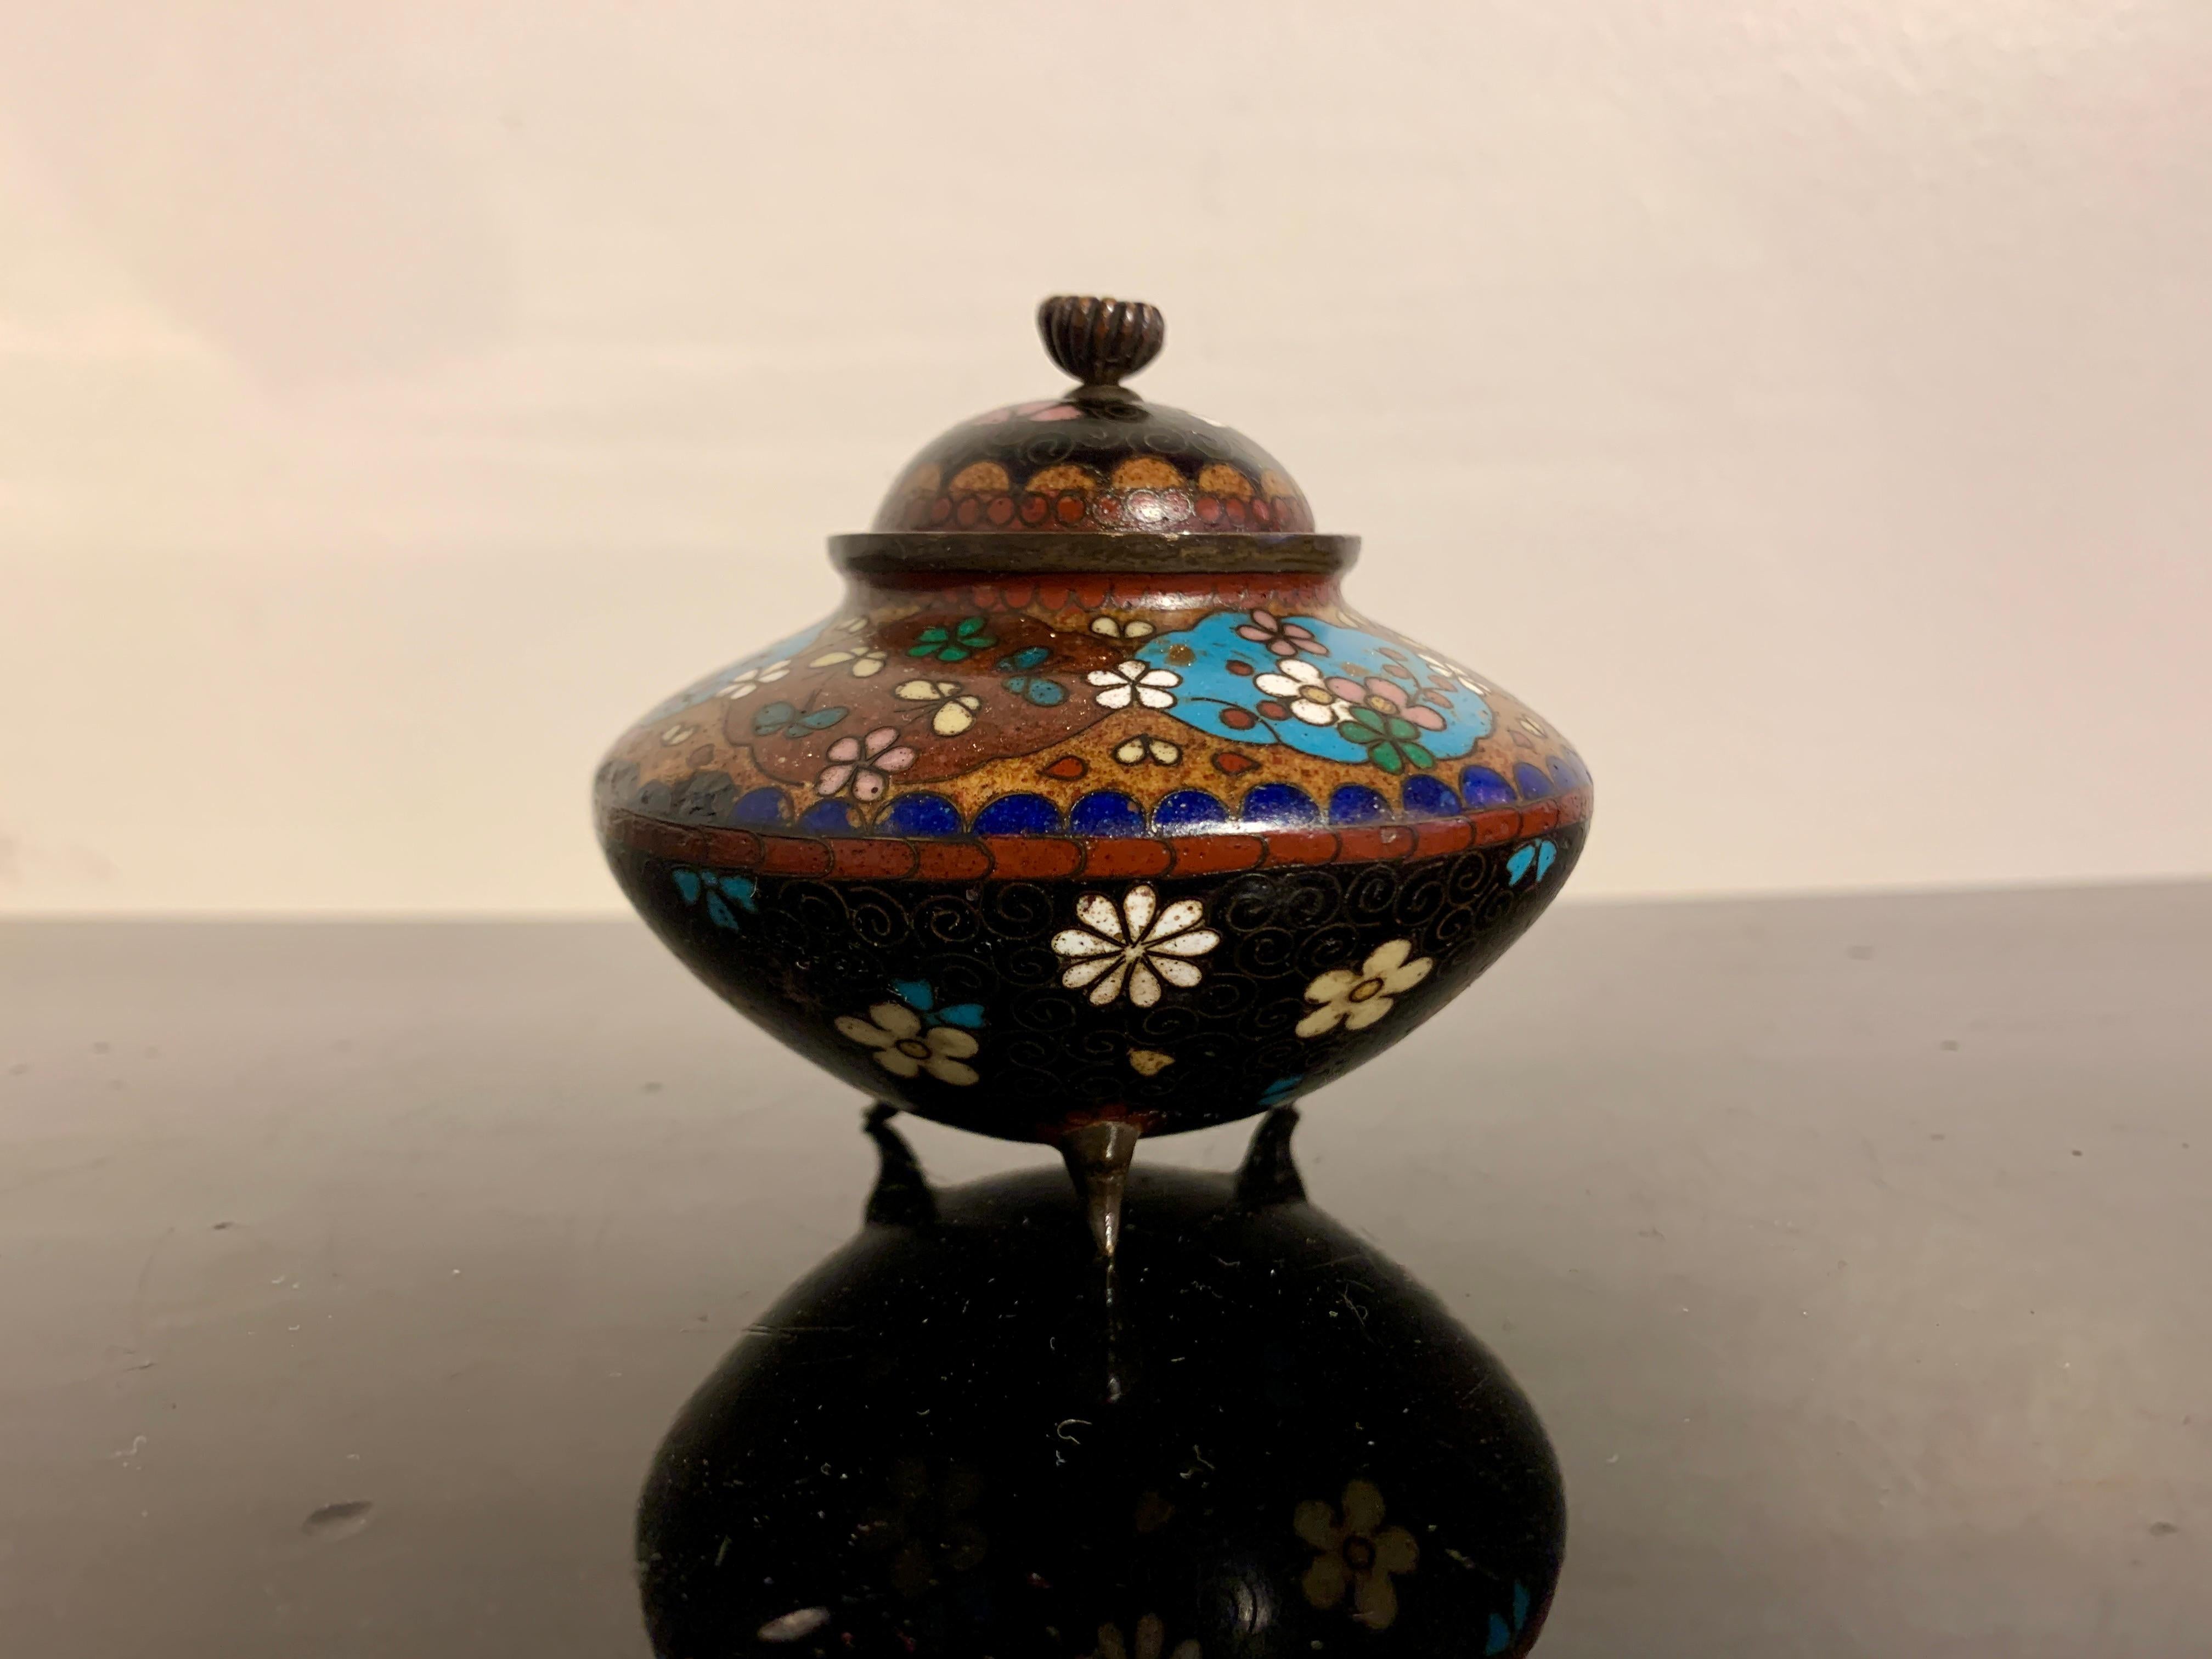 A small and delightful Japanese cloisonné and goldstone tripod incense burner and cover, Meiji period, late 19th century, Japan.

The small incense burner, called a koro, is comprised of a squat, compressed globular body supported by three short